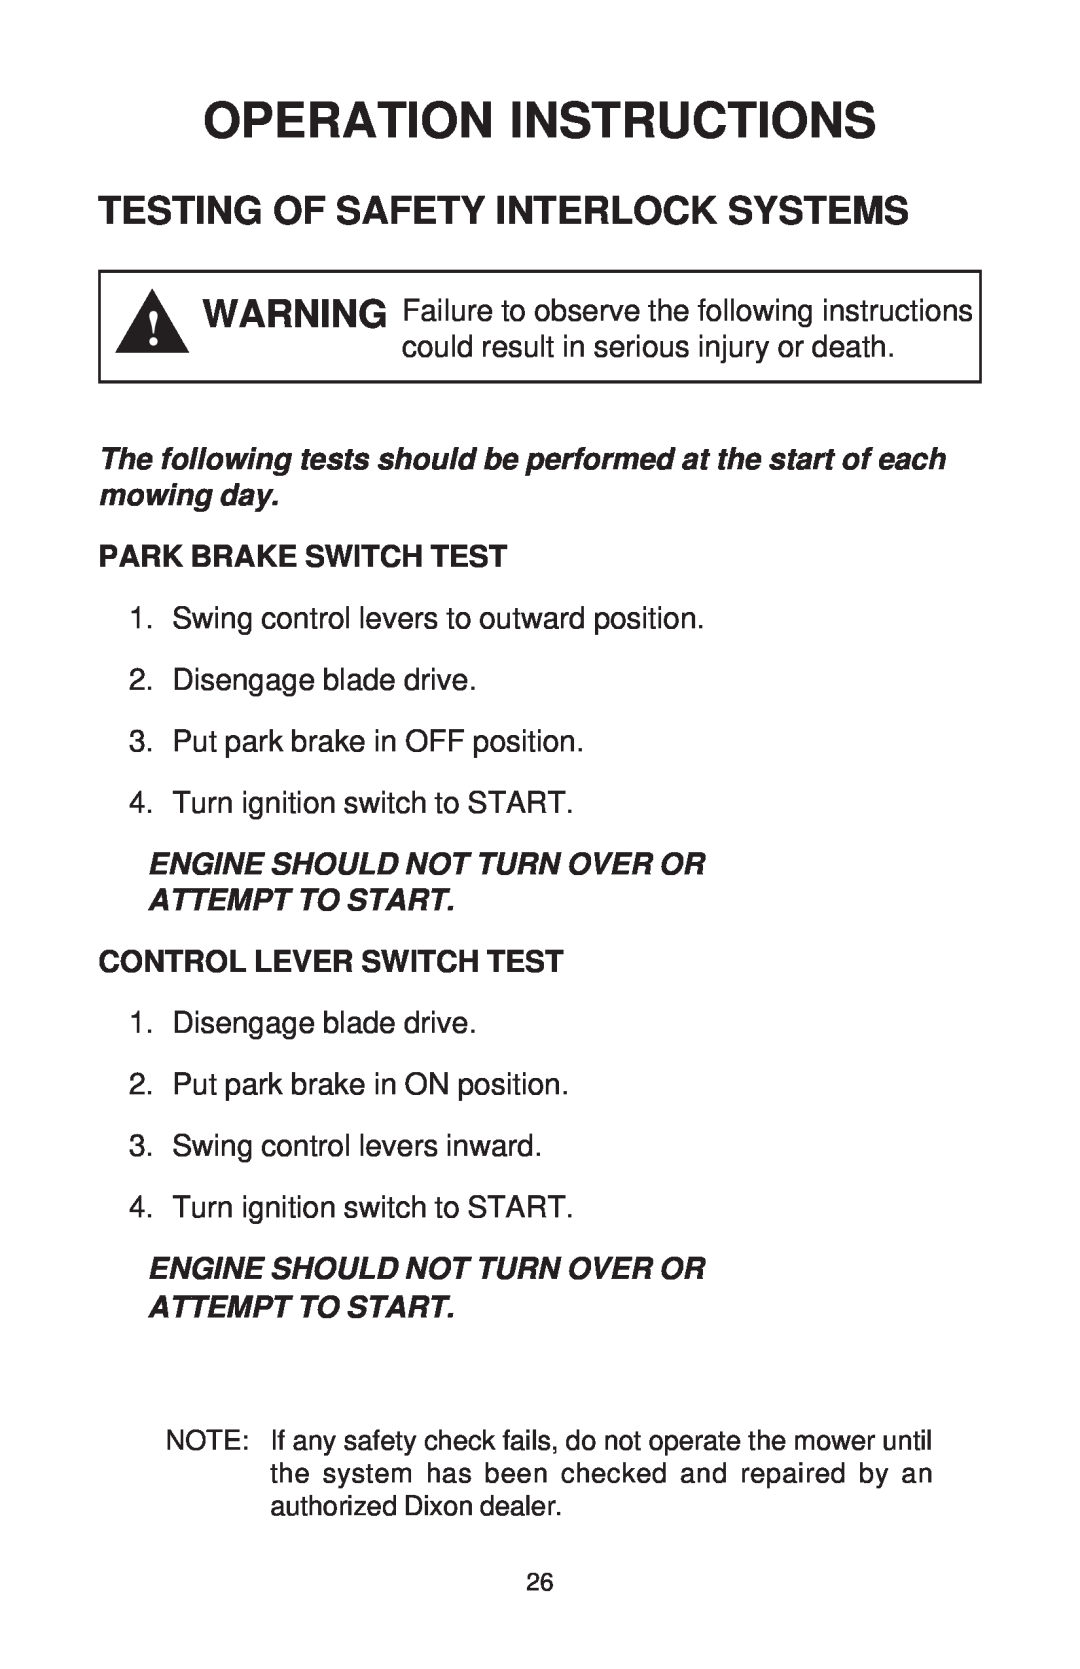 Dixon ZTR 44/968999538 manual Testing Of Safety Interlock Systems, Operation Instructions, Park Brake Switch Test 